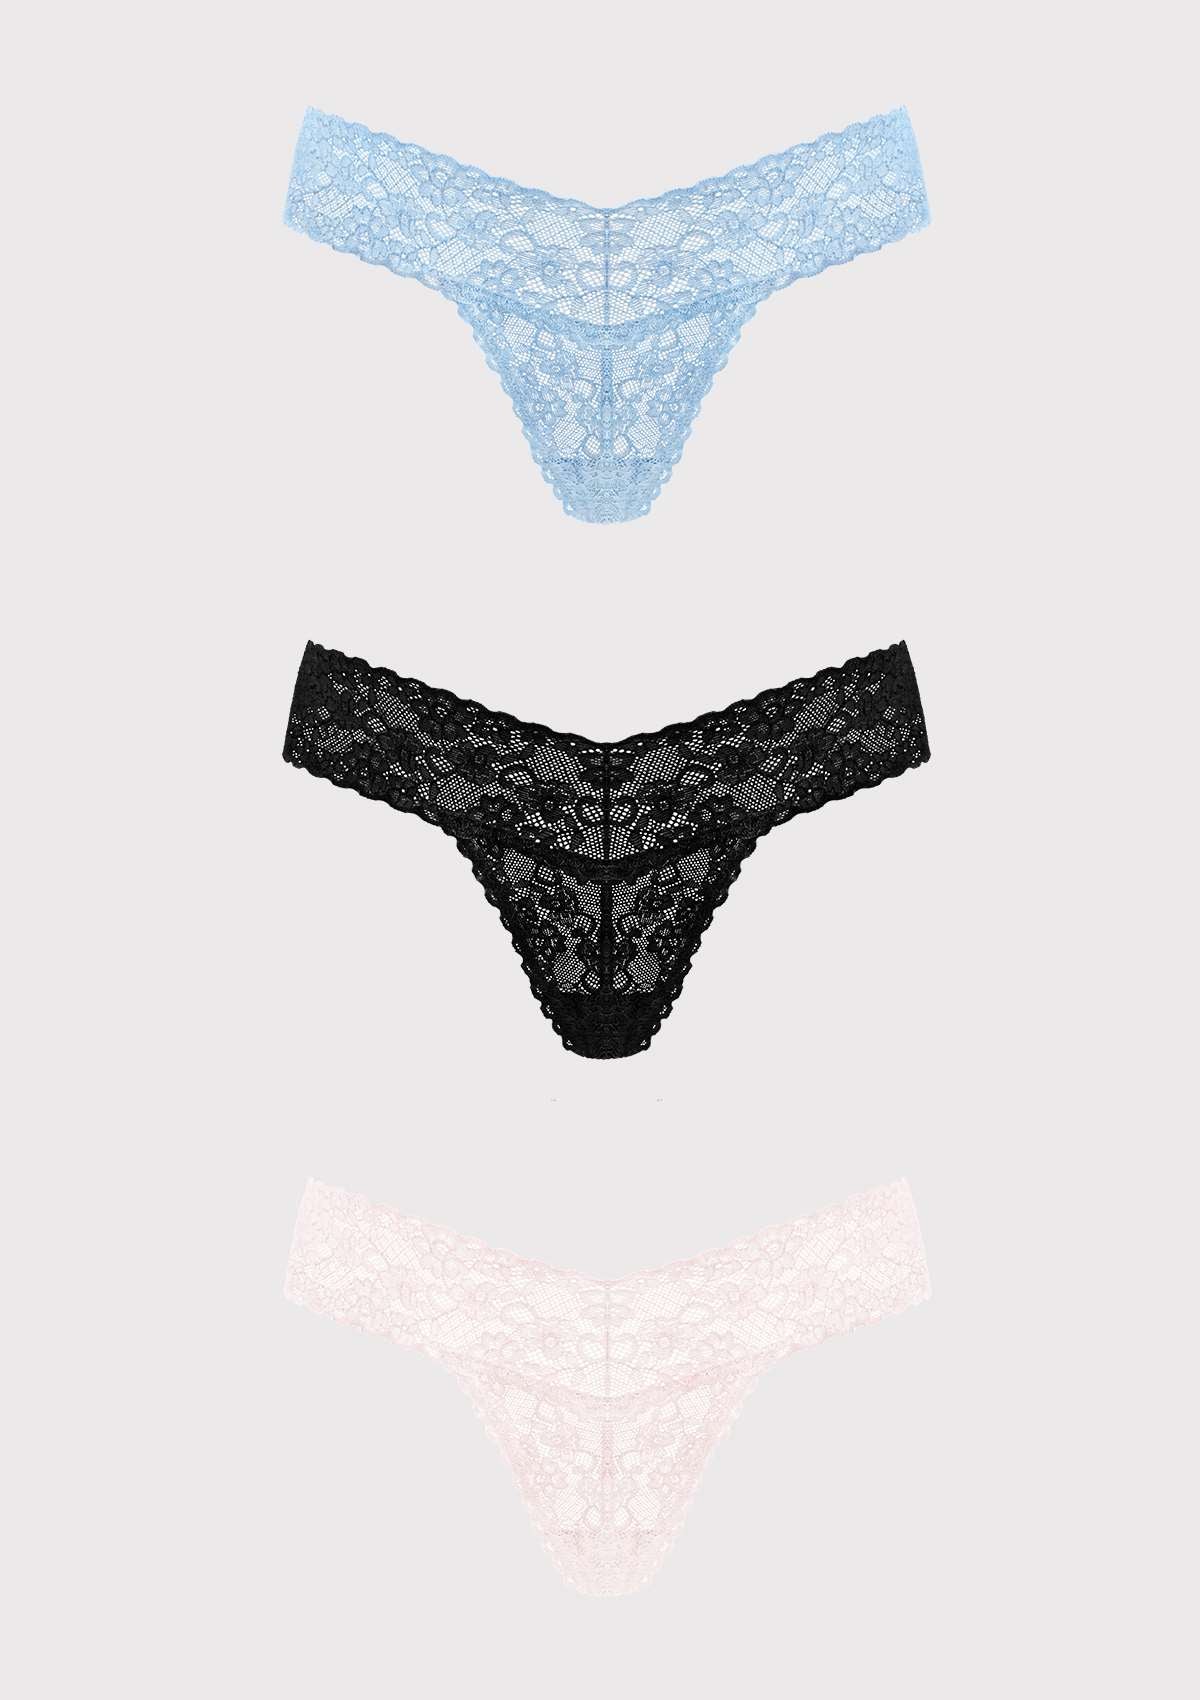 HSIA Soft Sexy Lace Cheeky Thong Underwear 3 Pack - S / Black+Storm Blue+Dusty Peach